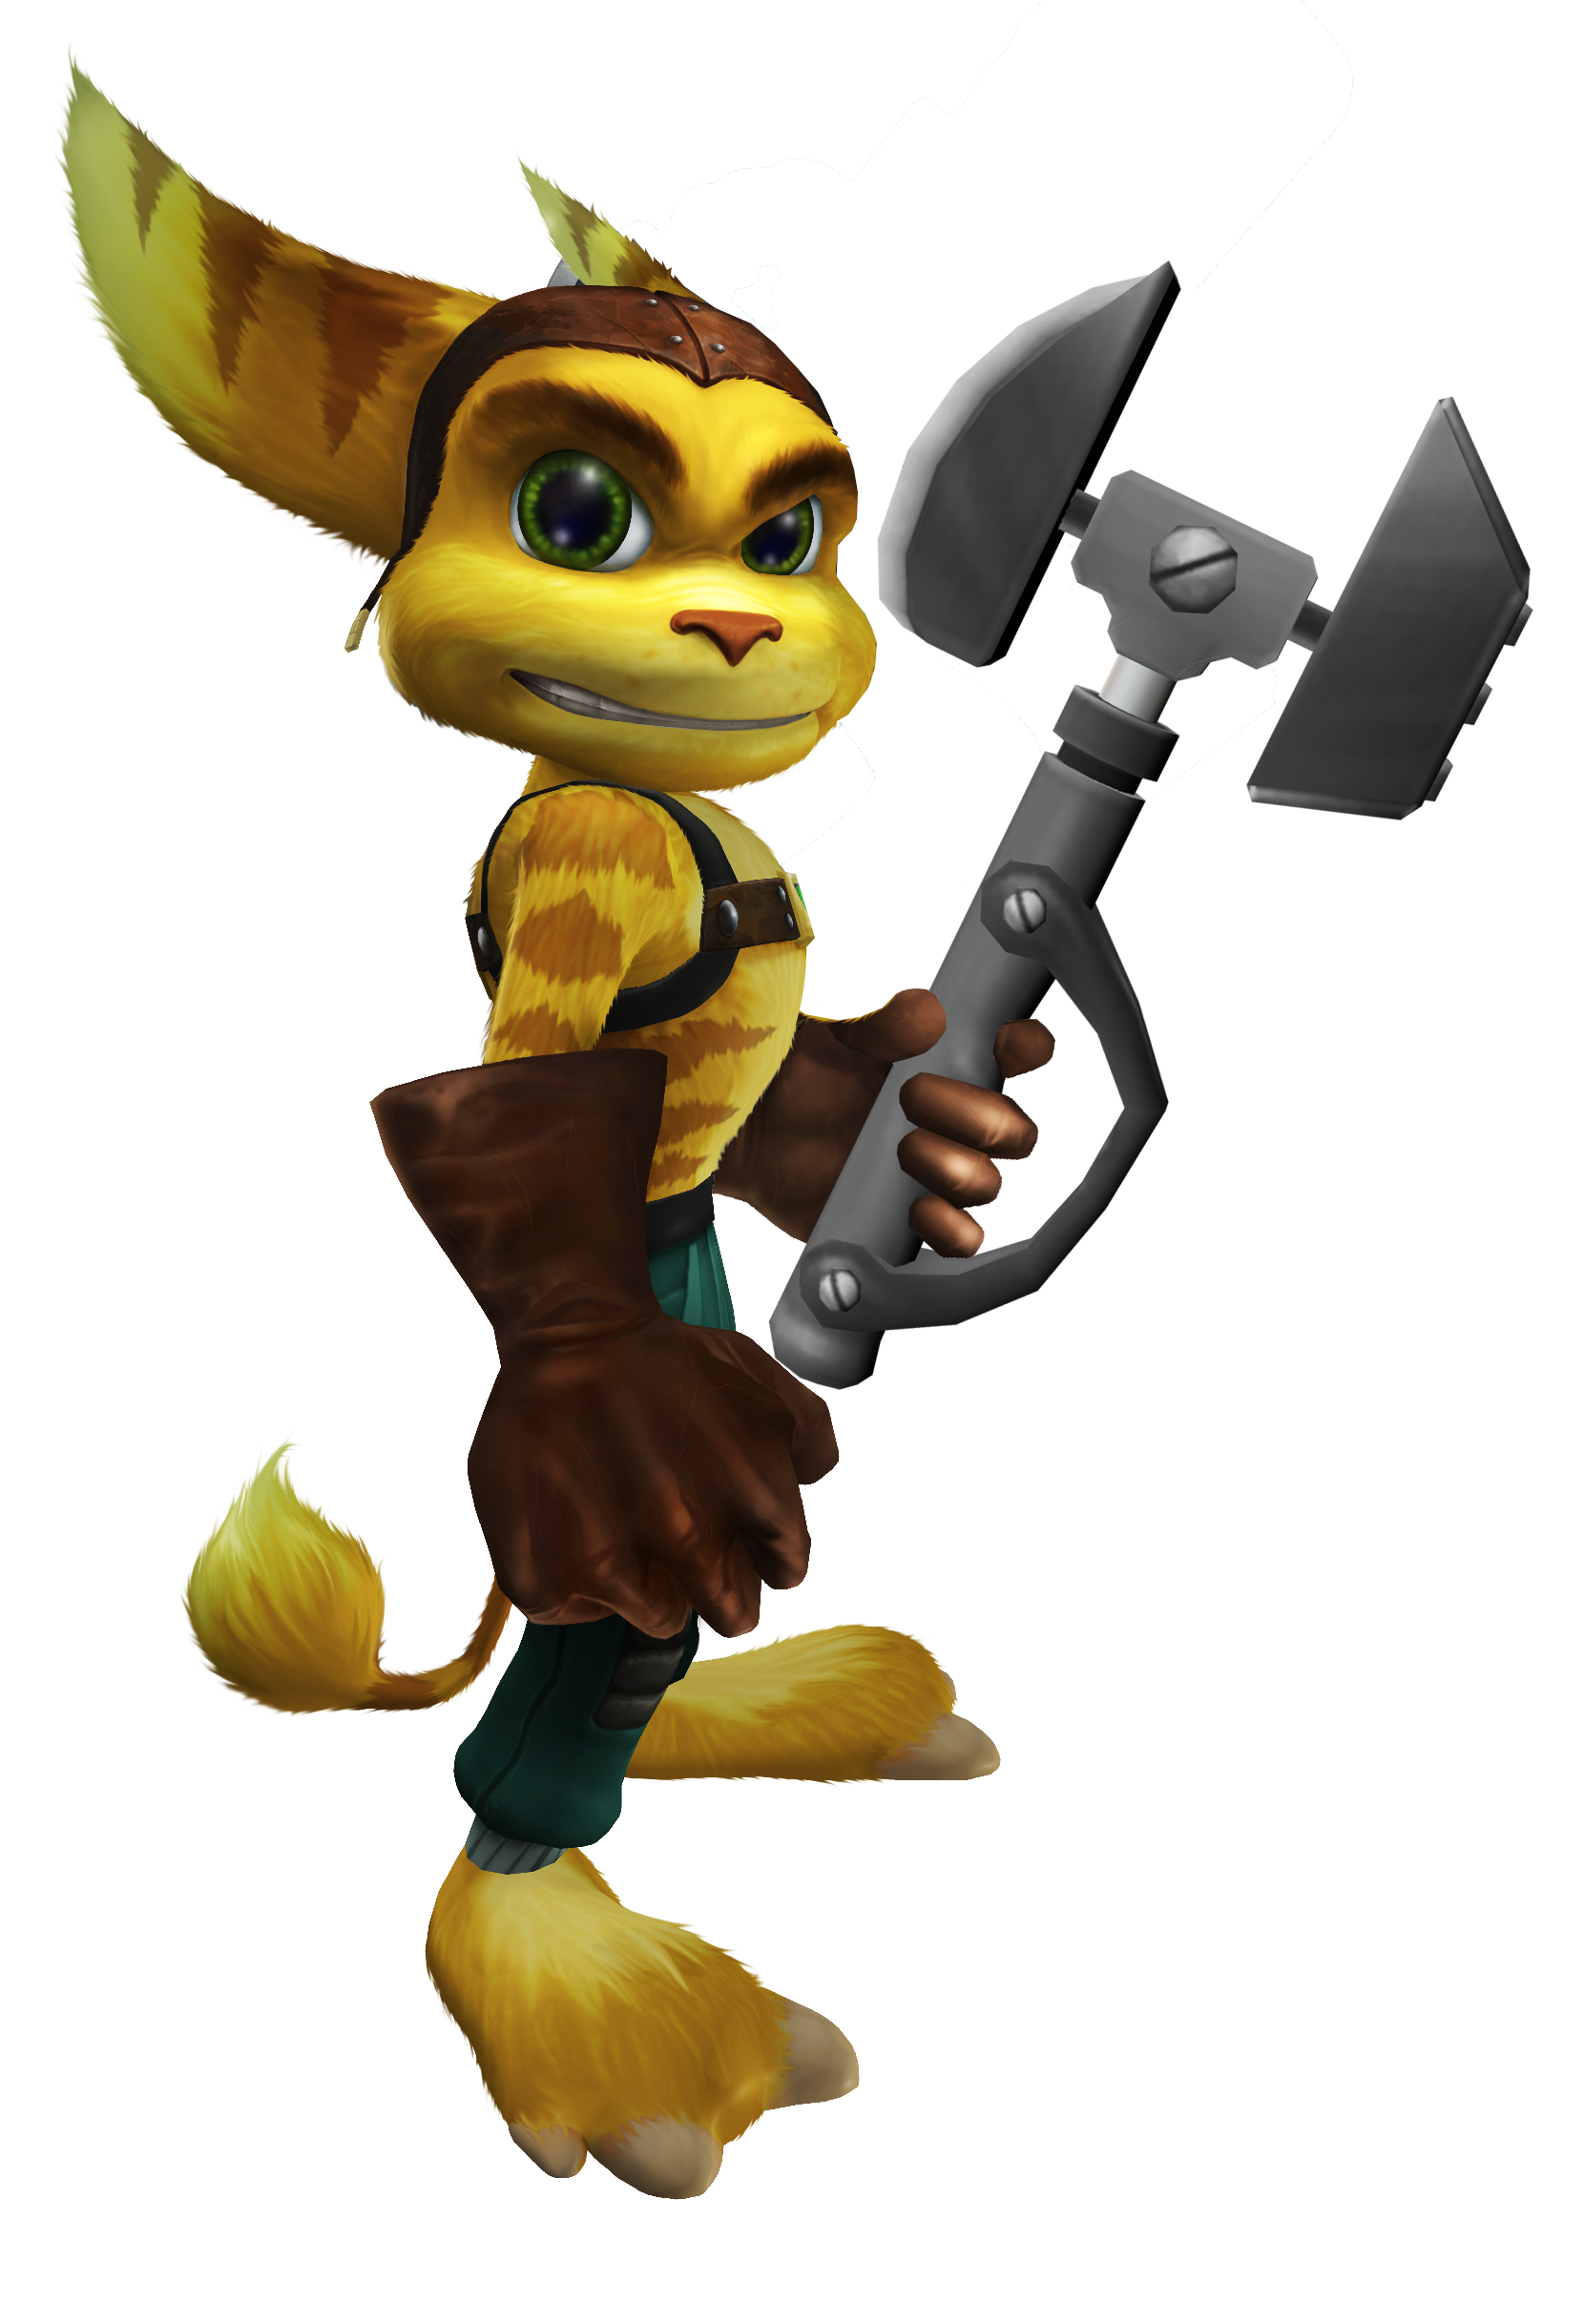 ratchet and clank ps2